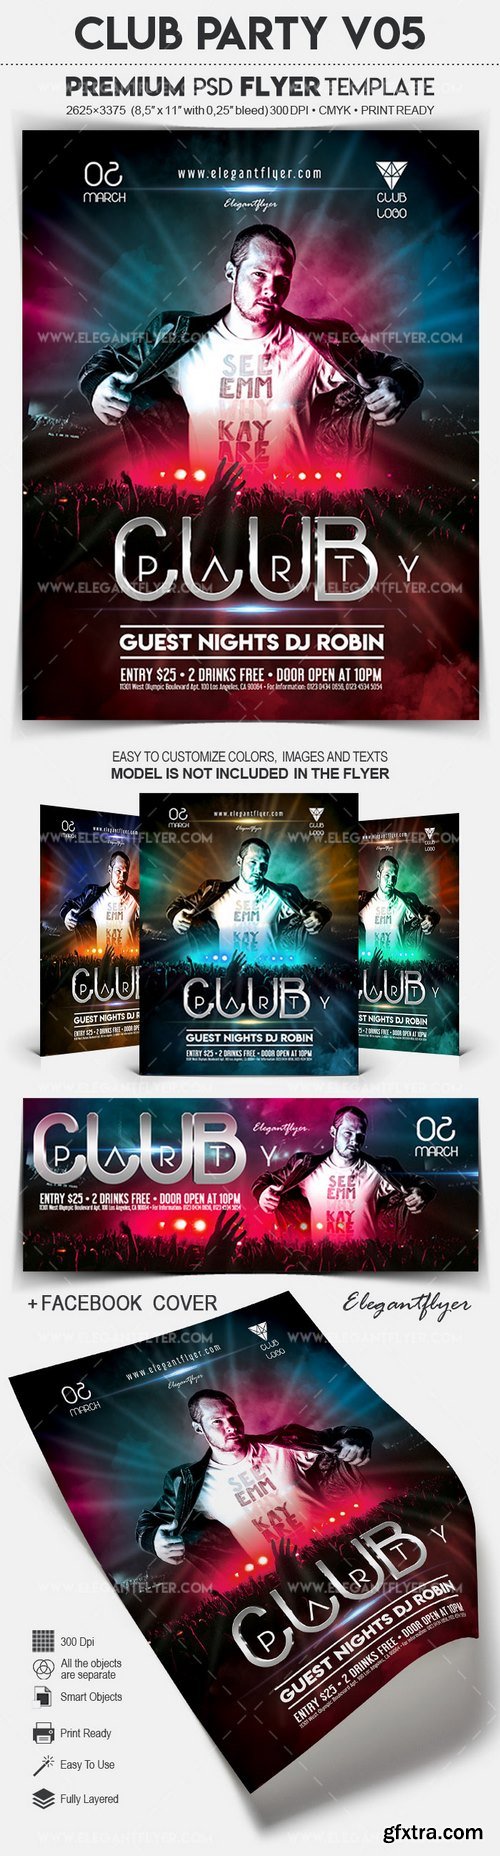 Club Party V05 – Flyer PSD Template + Facebook Cover